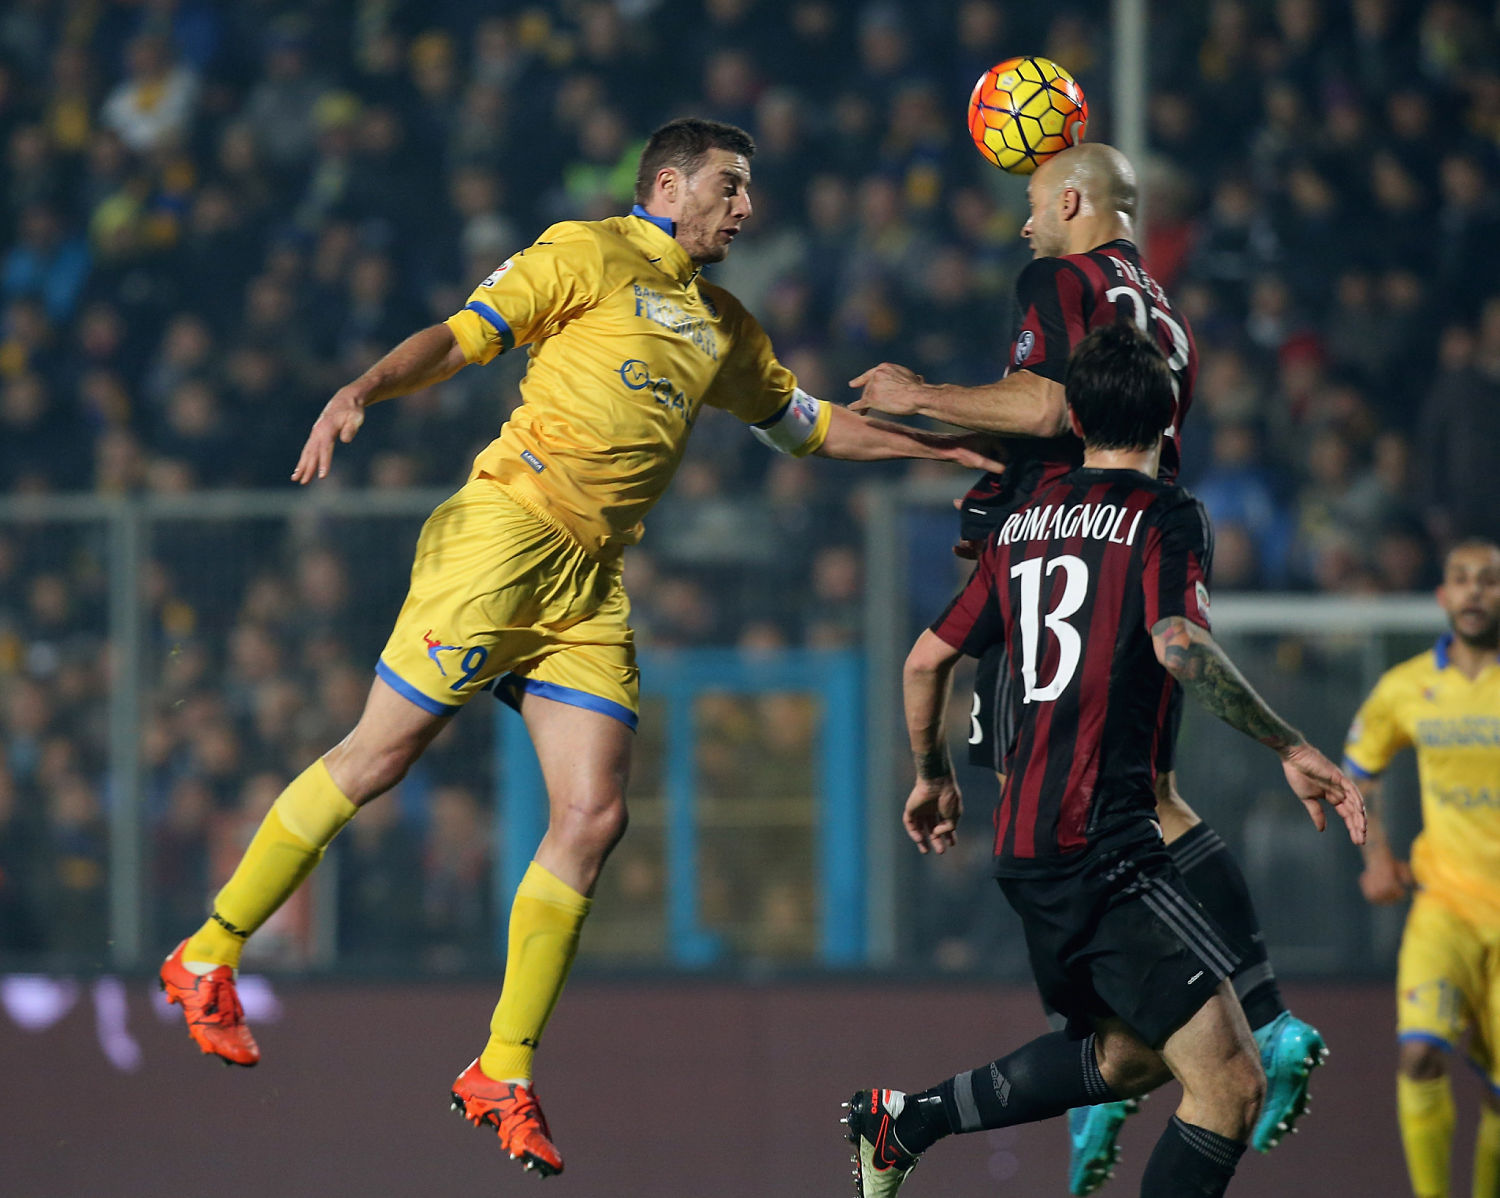 Alex competes for the ball in air with Daniel Ciofani. | Maurizio Lagana/Getty Images